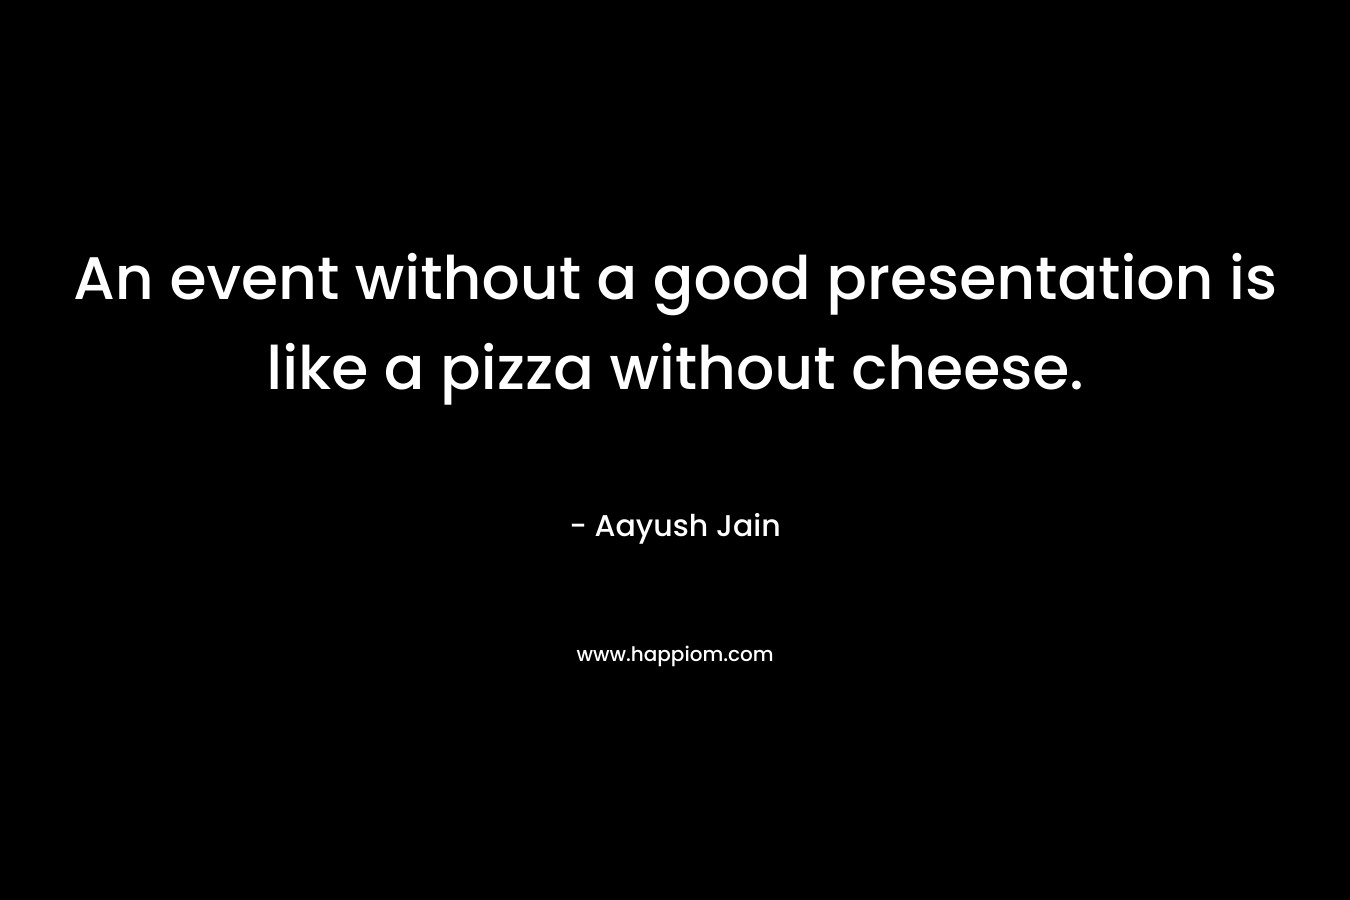 An event without a good presentation is like a pizza without cheese. – Aayush Jain